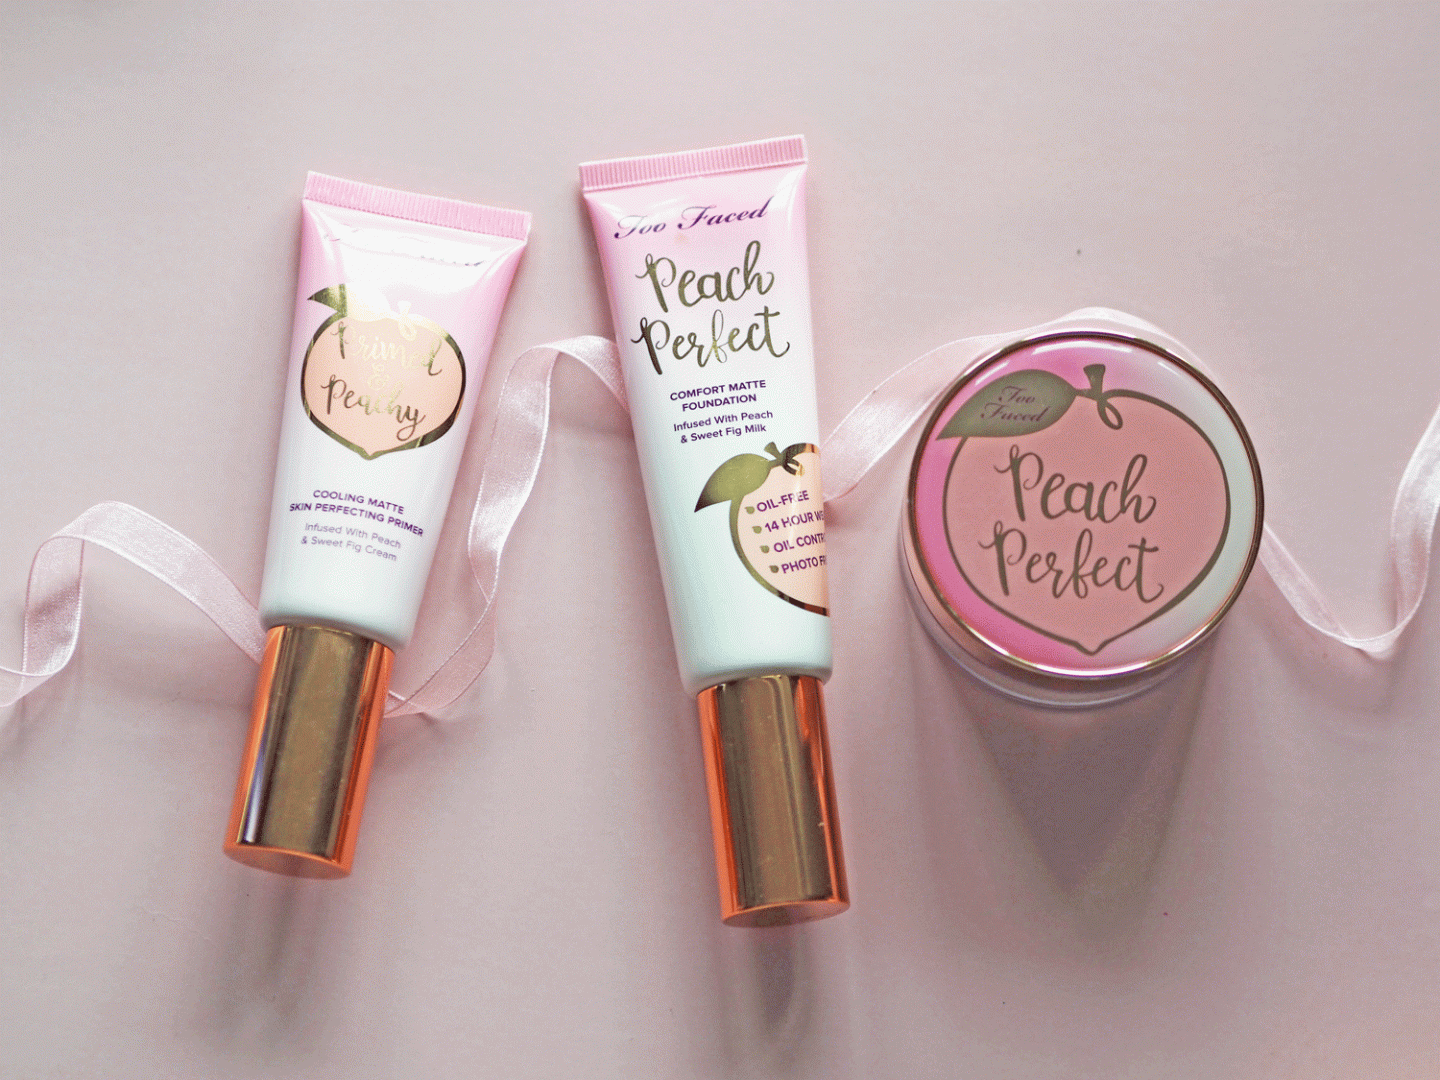 Too Faced Peach perfect comfort matte foundation